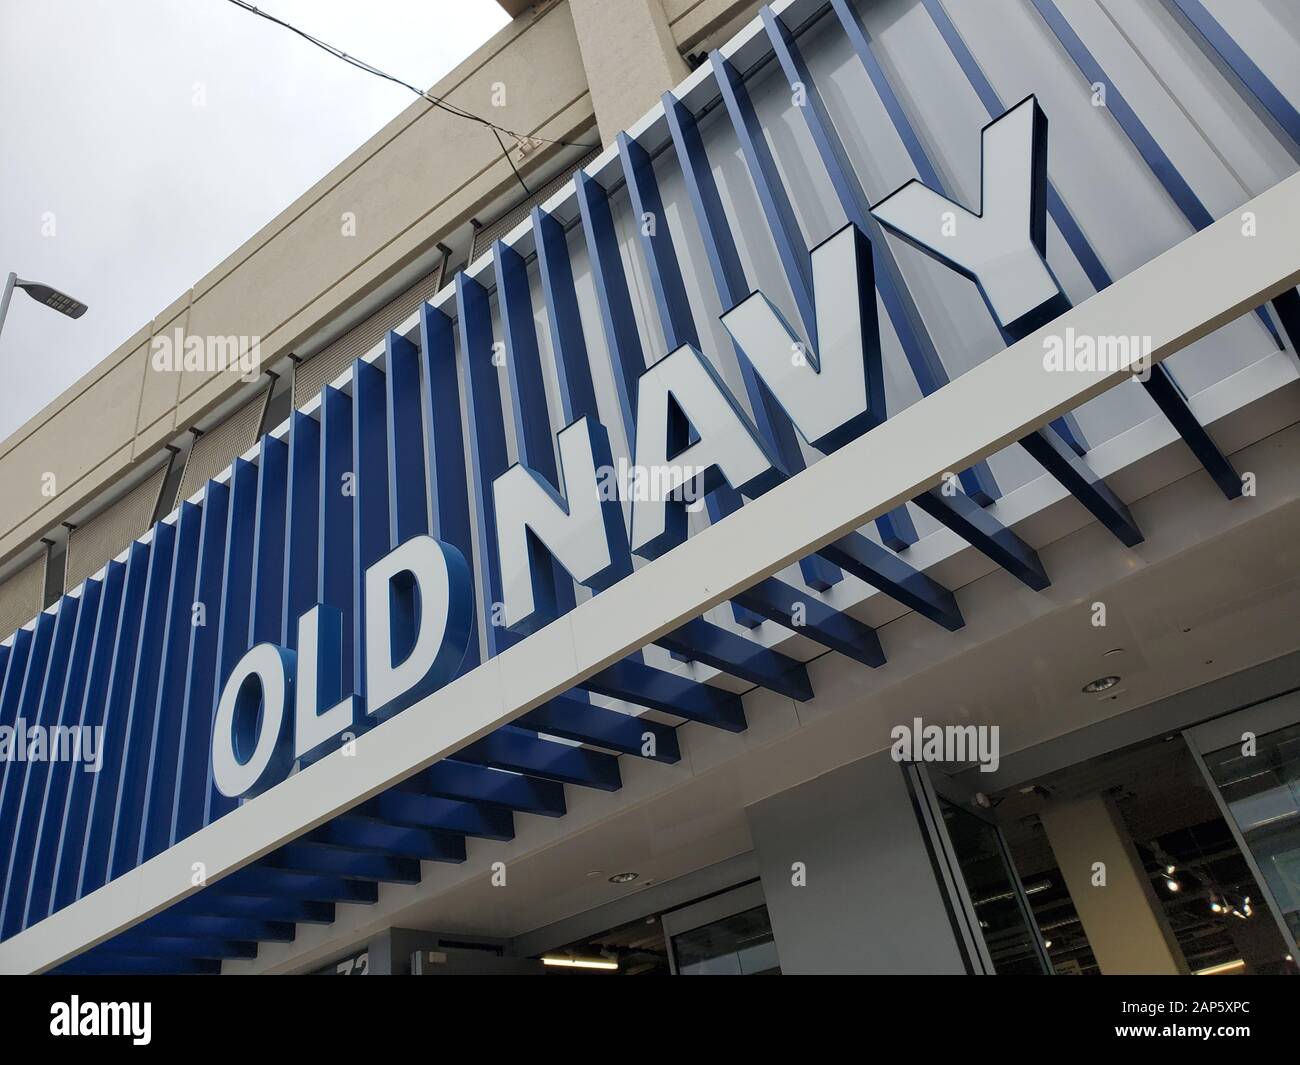 Facade with sign and logo for Old Navy clothing retail store in Broadway Plaza shopping mall in Walnut Creek, California, January 13, 2020. () Stock Photo